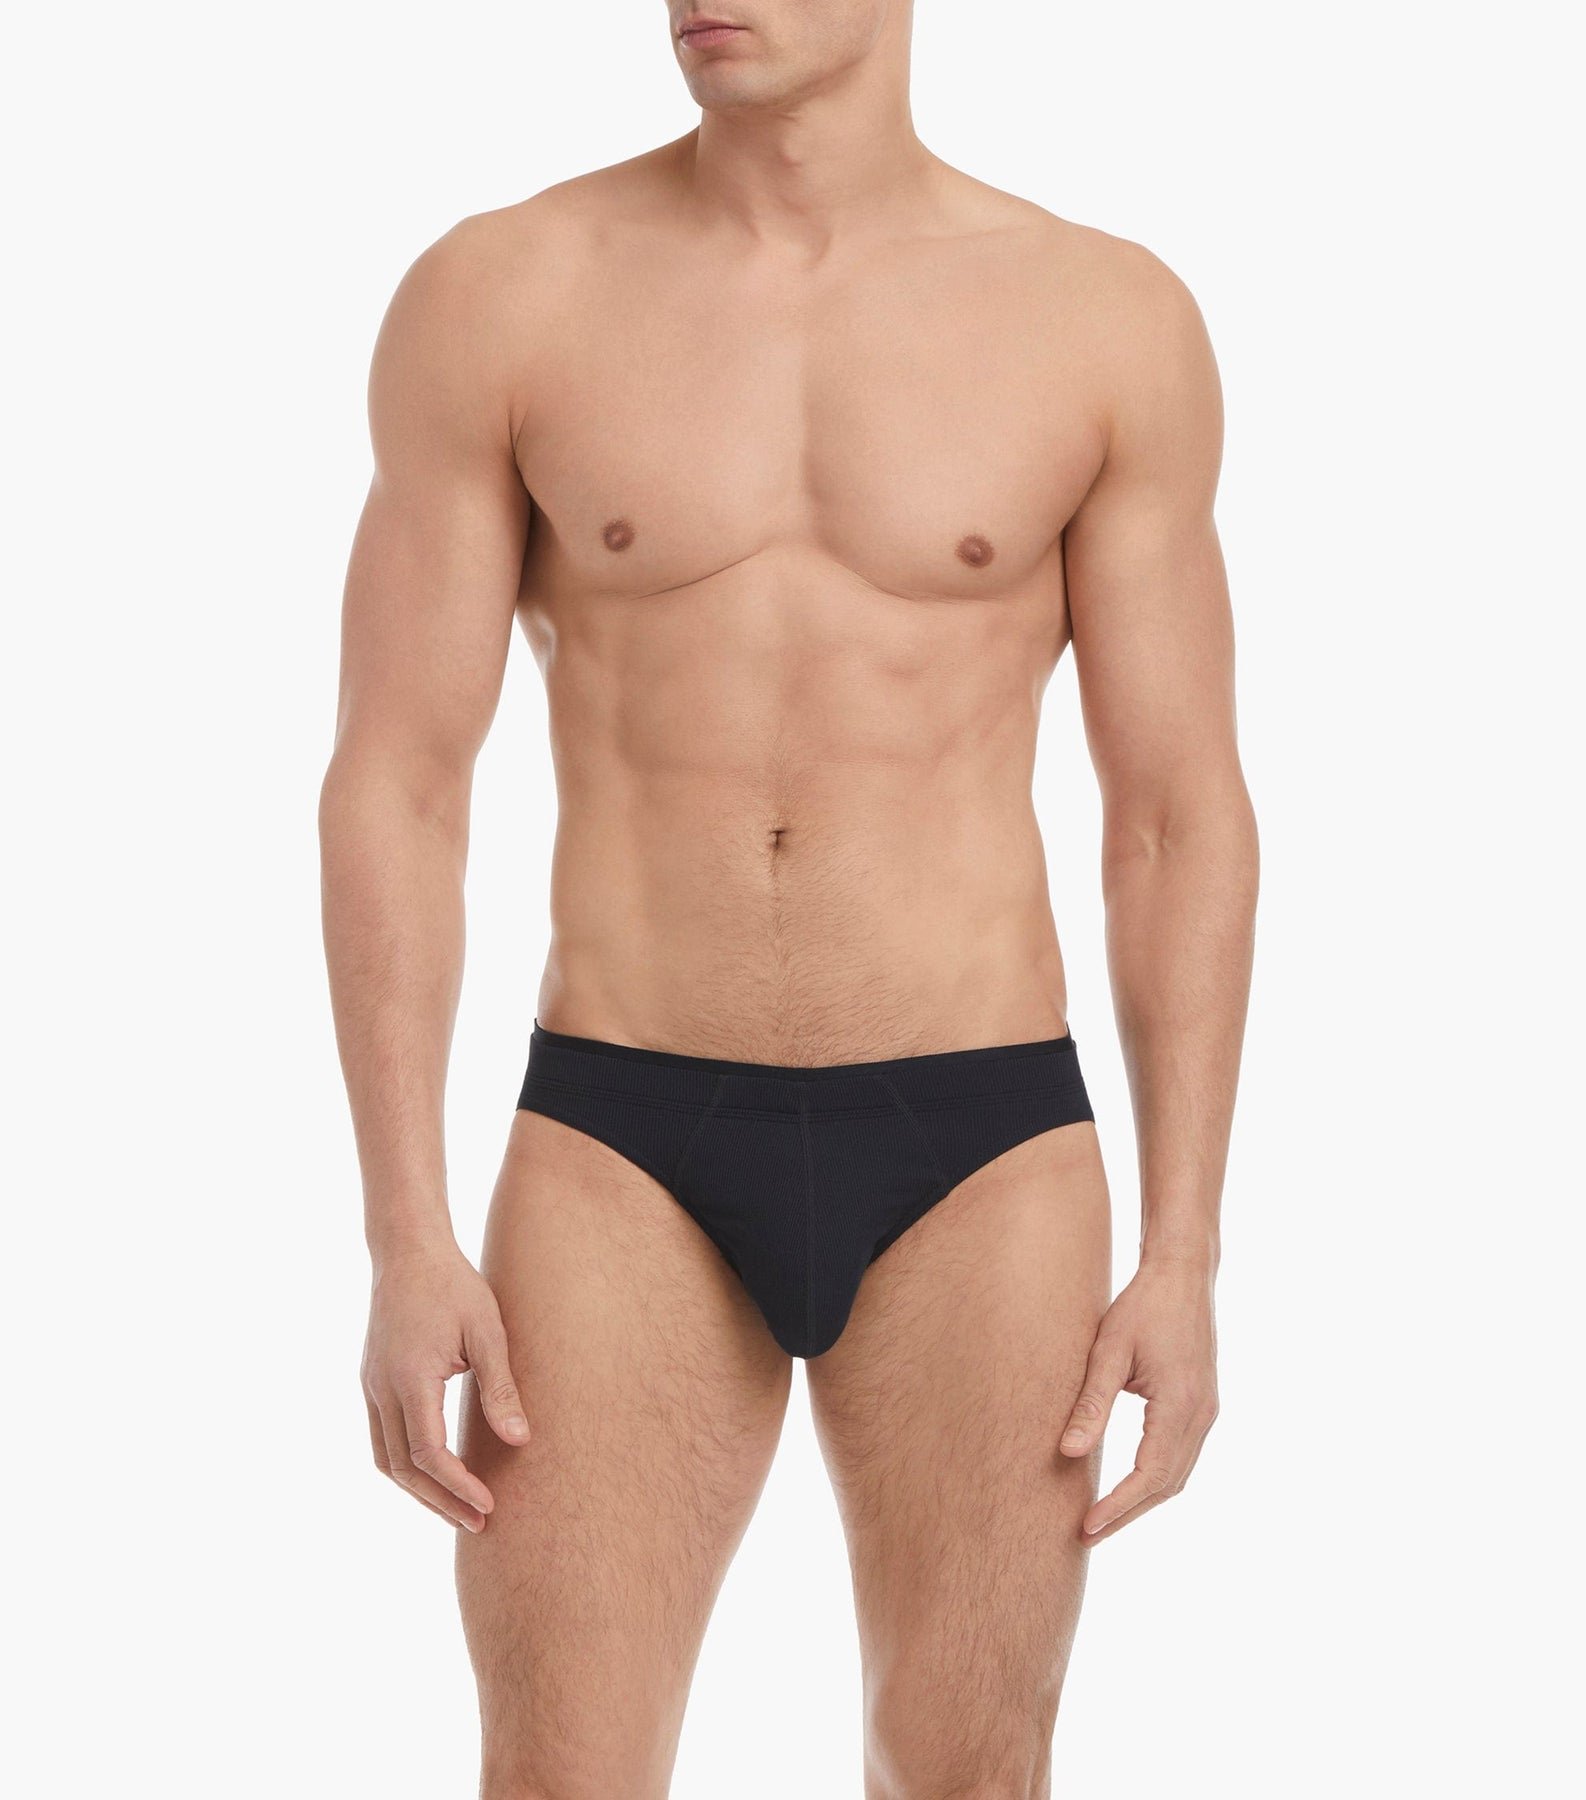 5 Best Low Rise Briefs for Men in 2023 The Ultimate Guide to Low